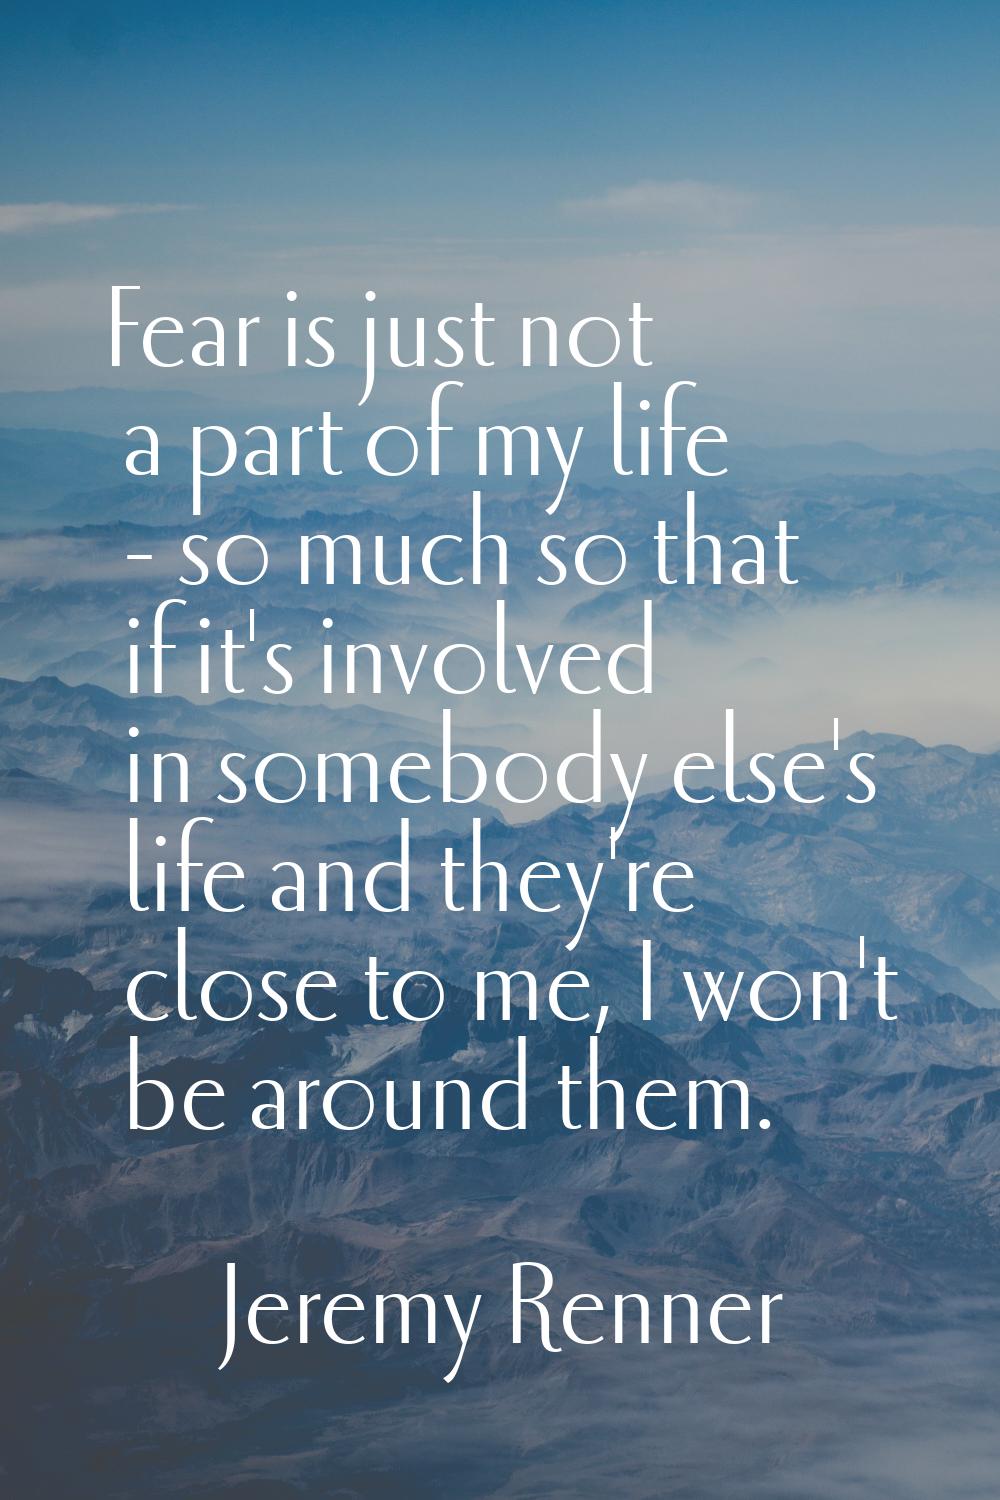 Fear is just not a part of my life - so much so that if it's involved in somebody else's life and t